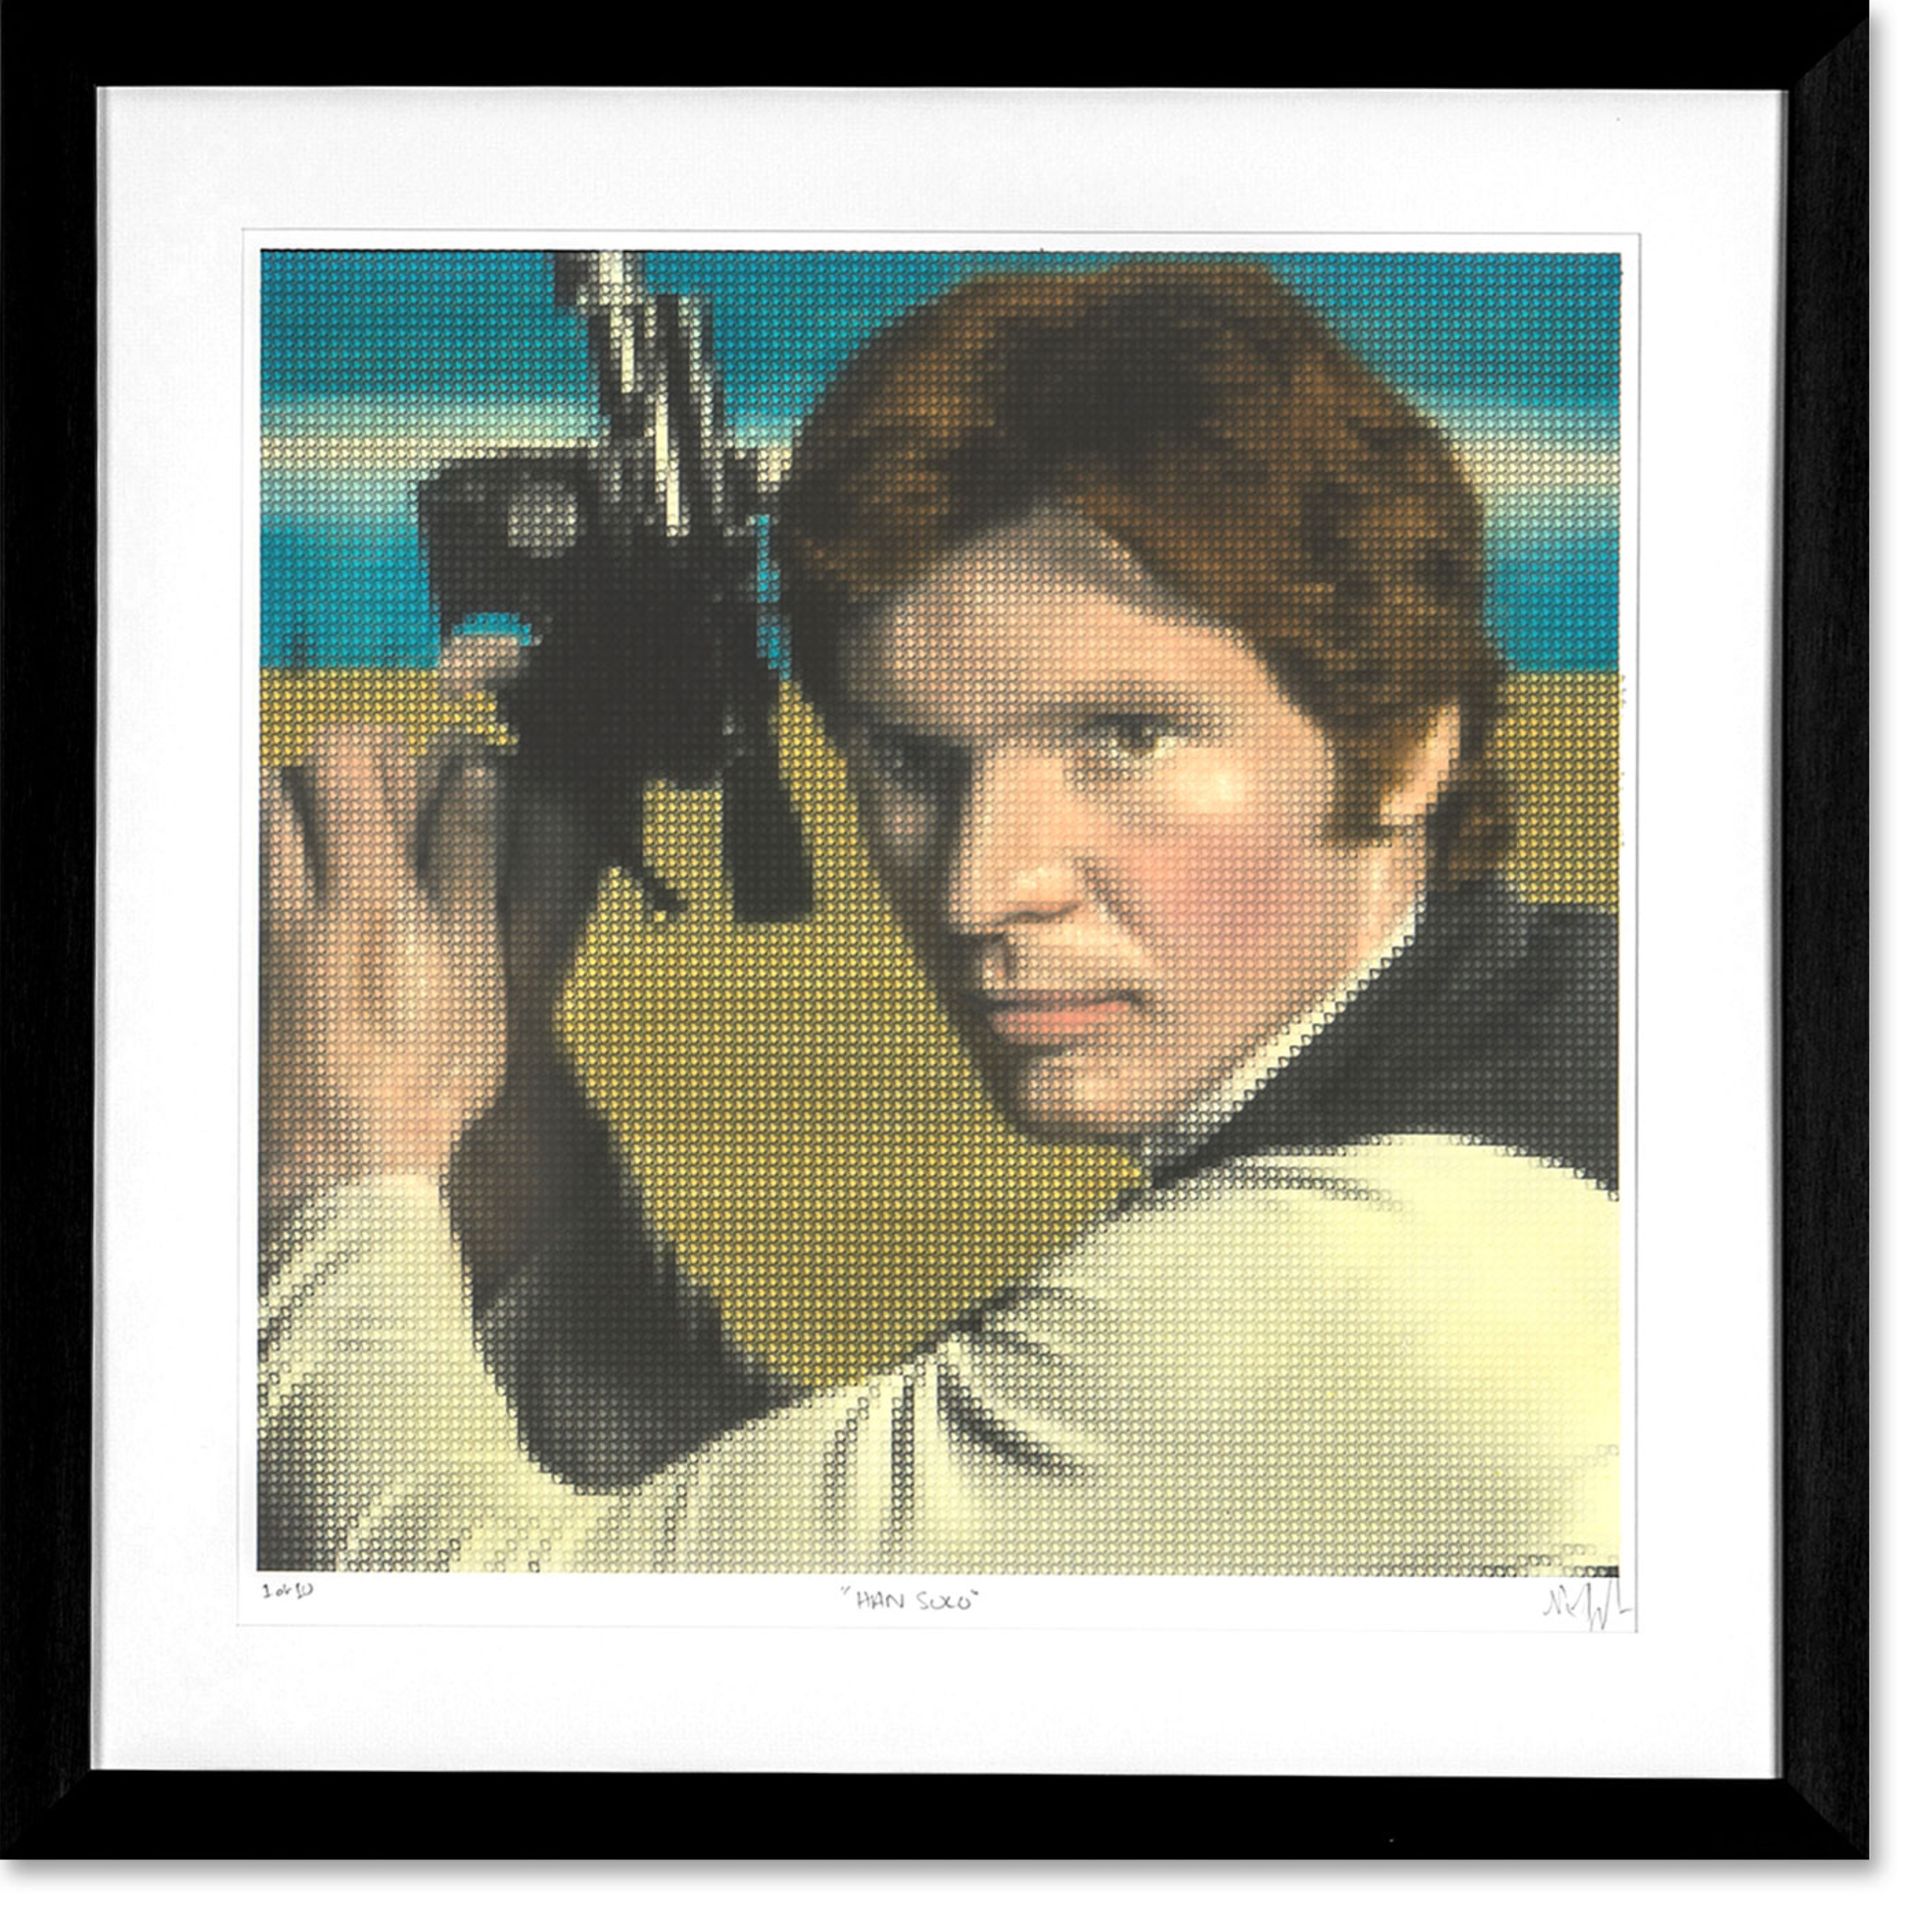 Han Solo - Image 2 of 4